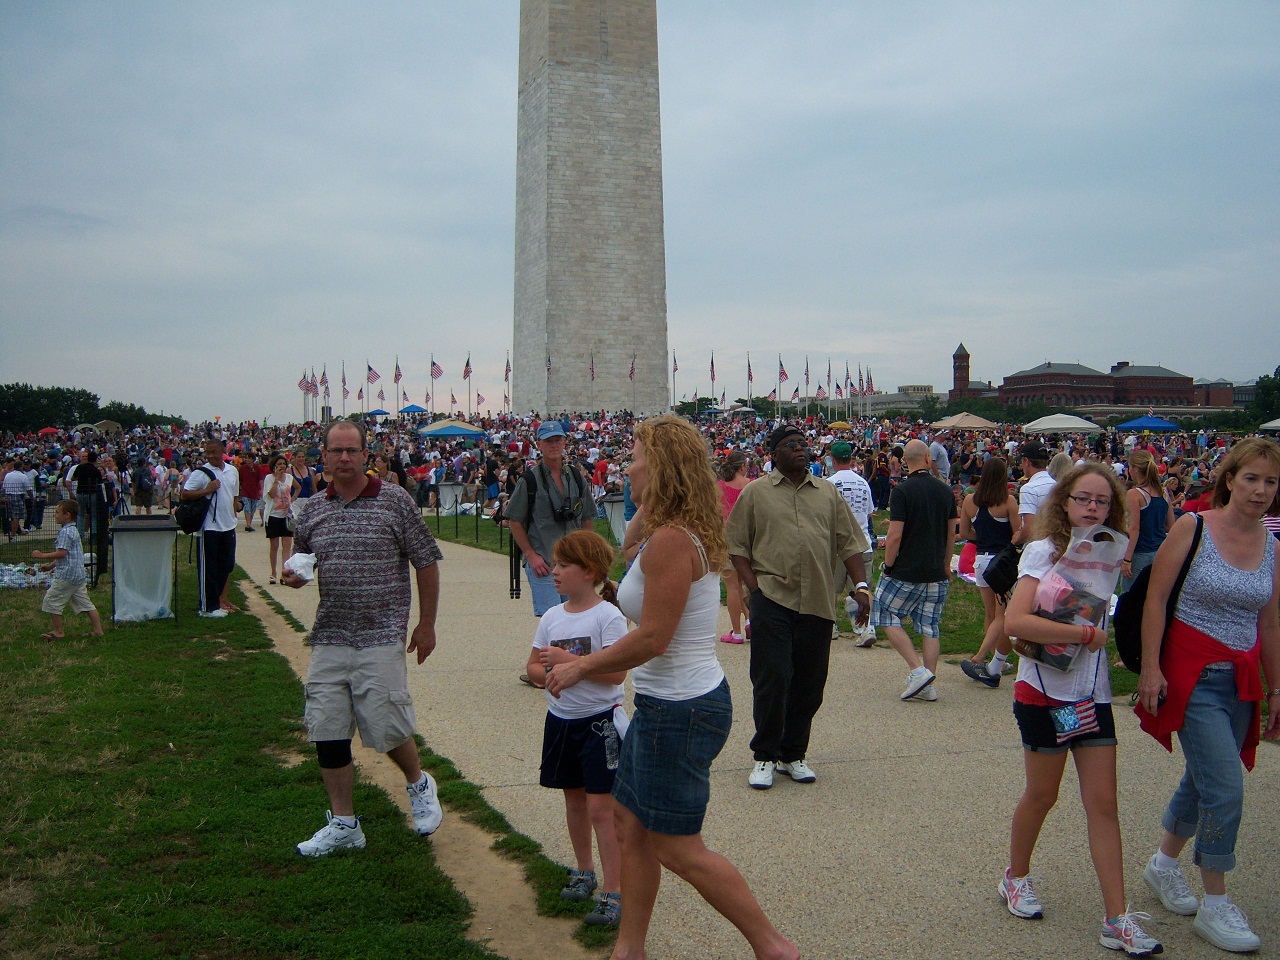 Attached picture 6714035-crowd.jpg